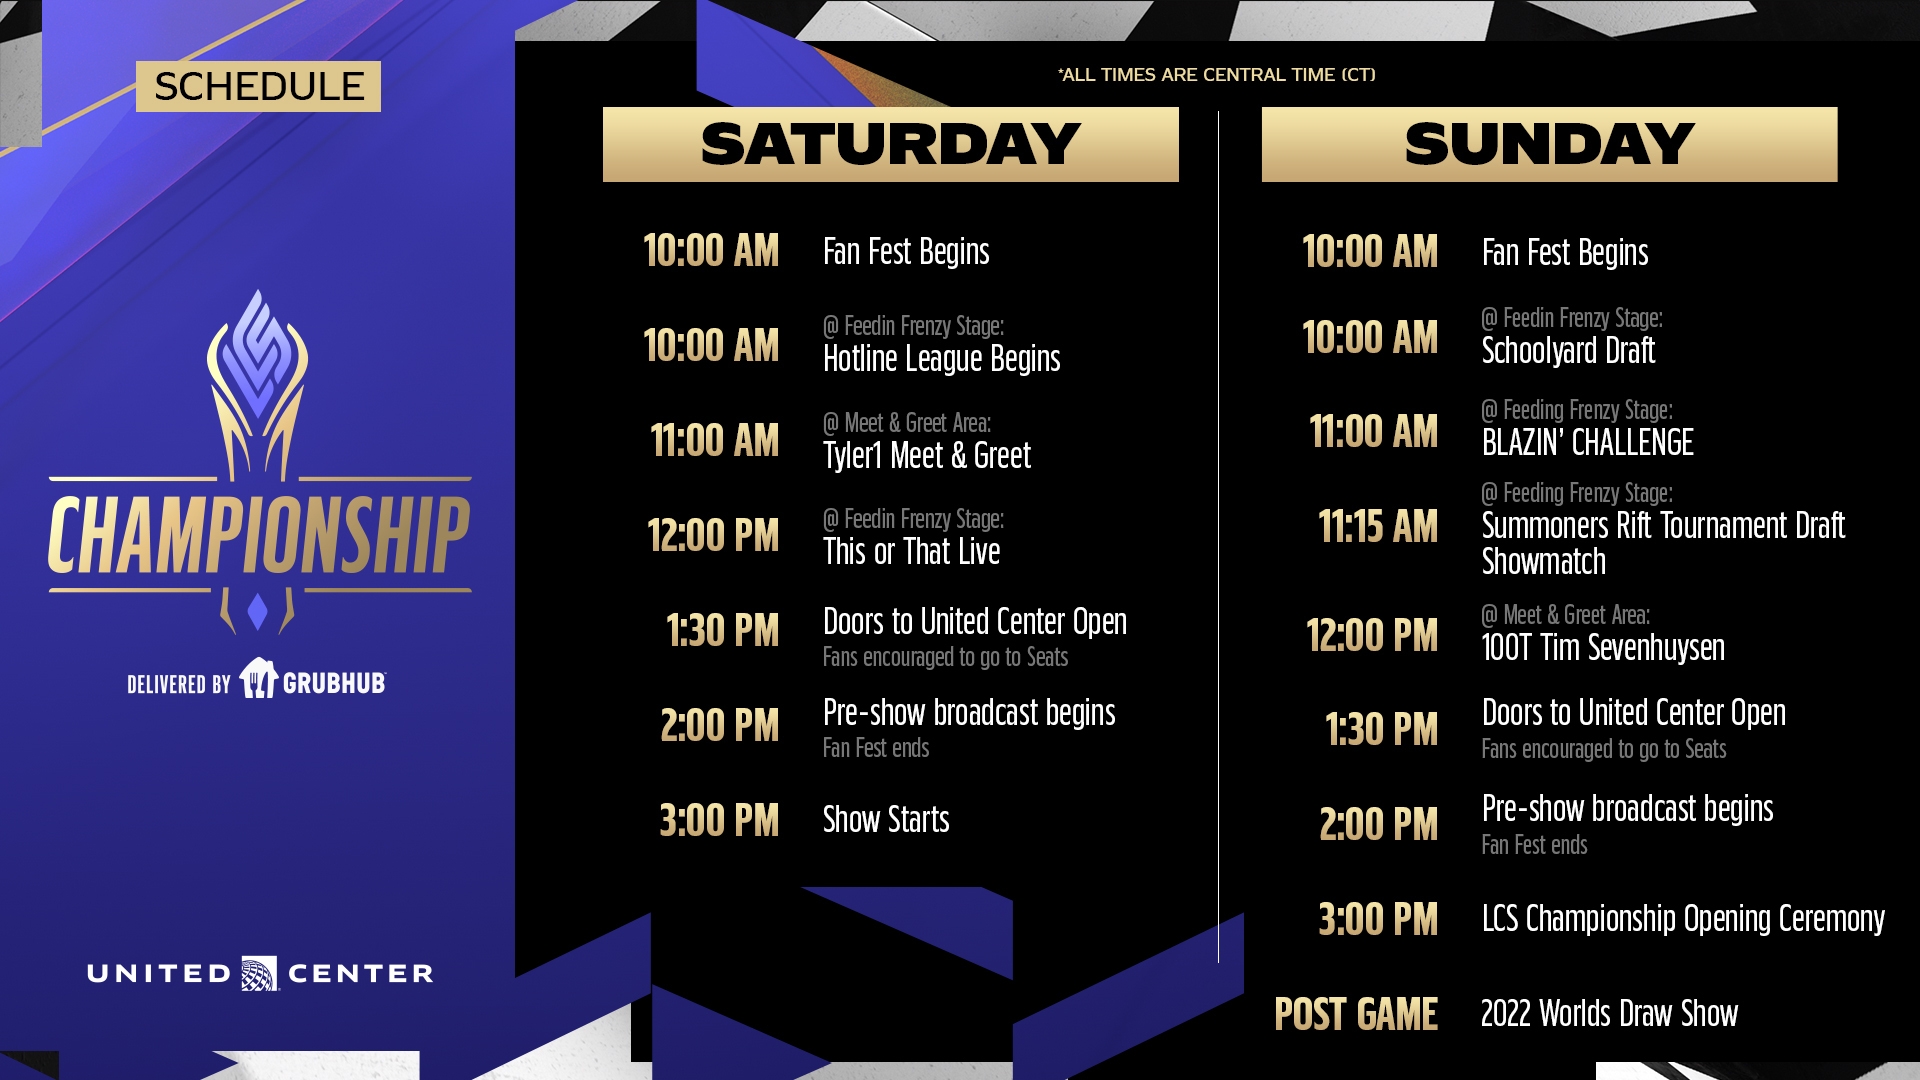 LoL Esports Schedule. LCS, LEC, MSI, League of Legends Games, Matches